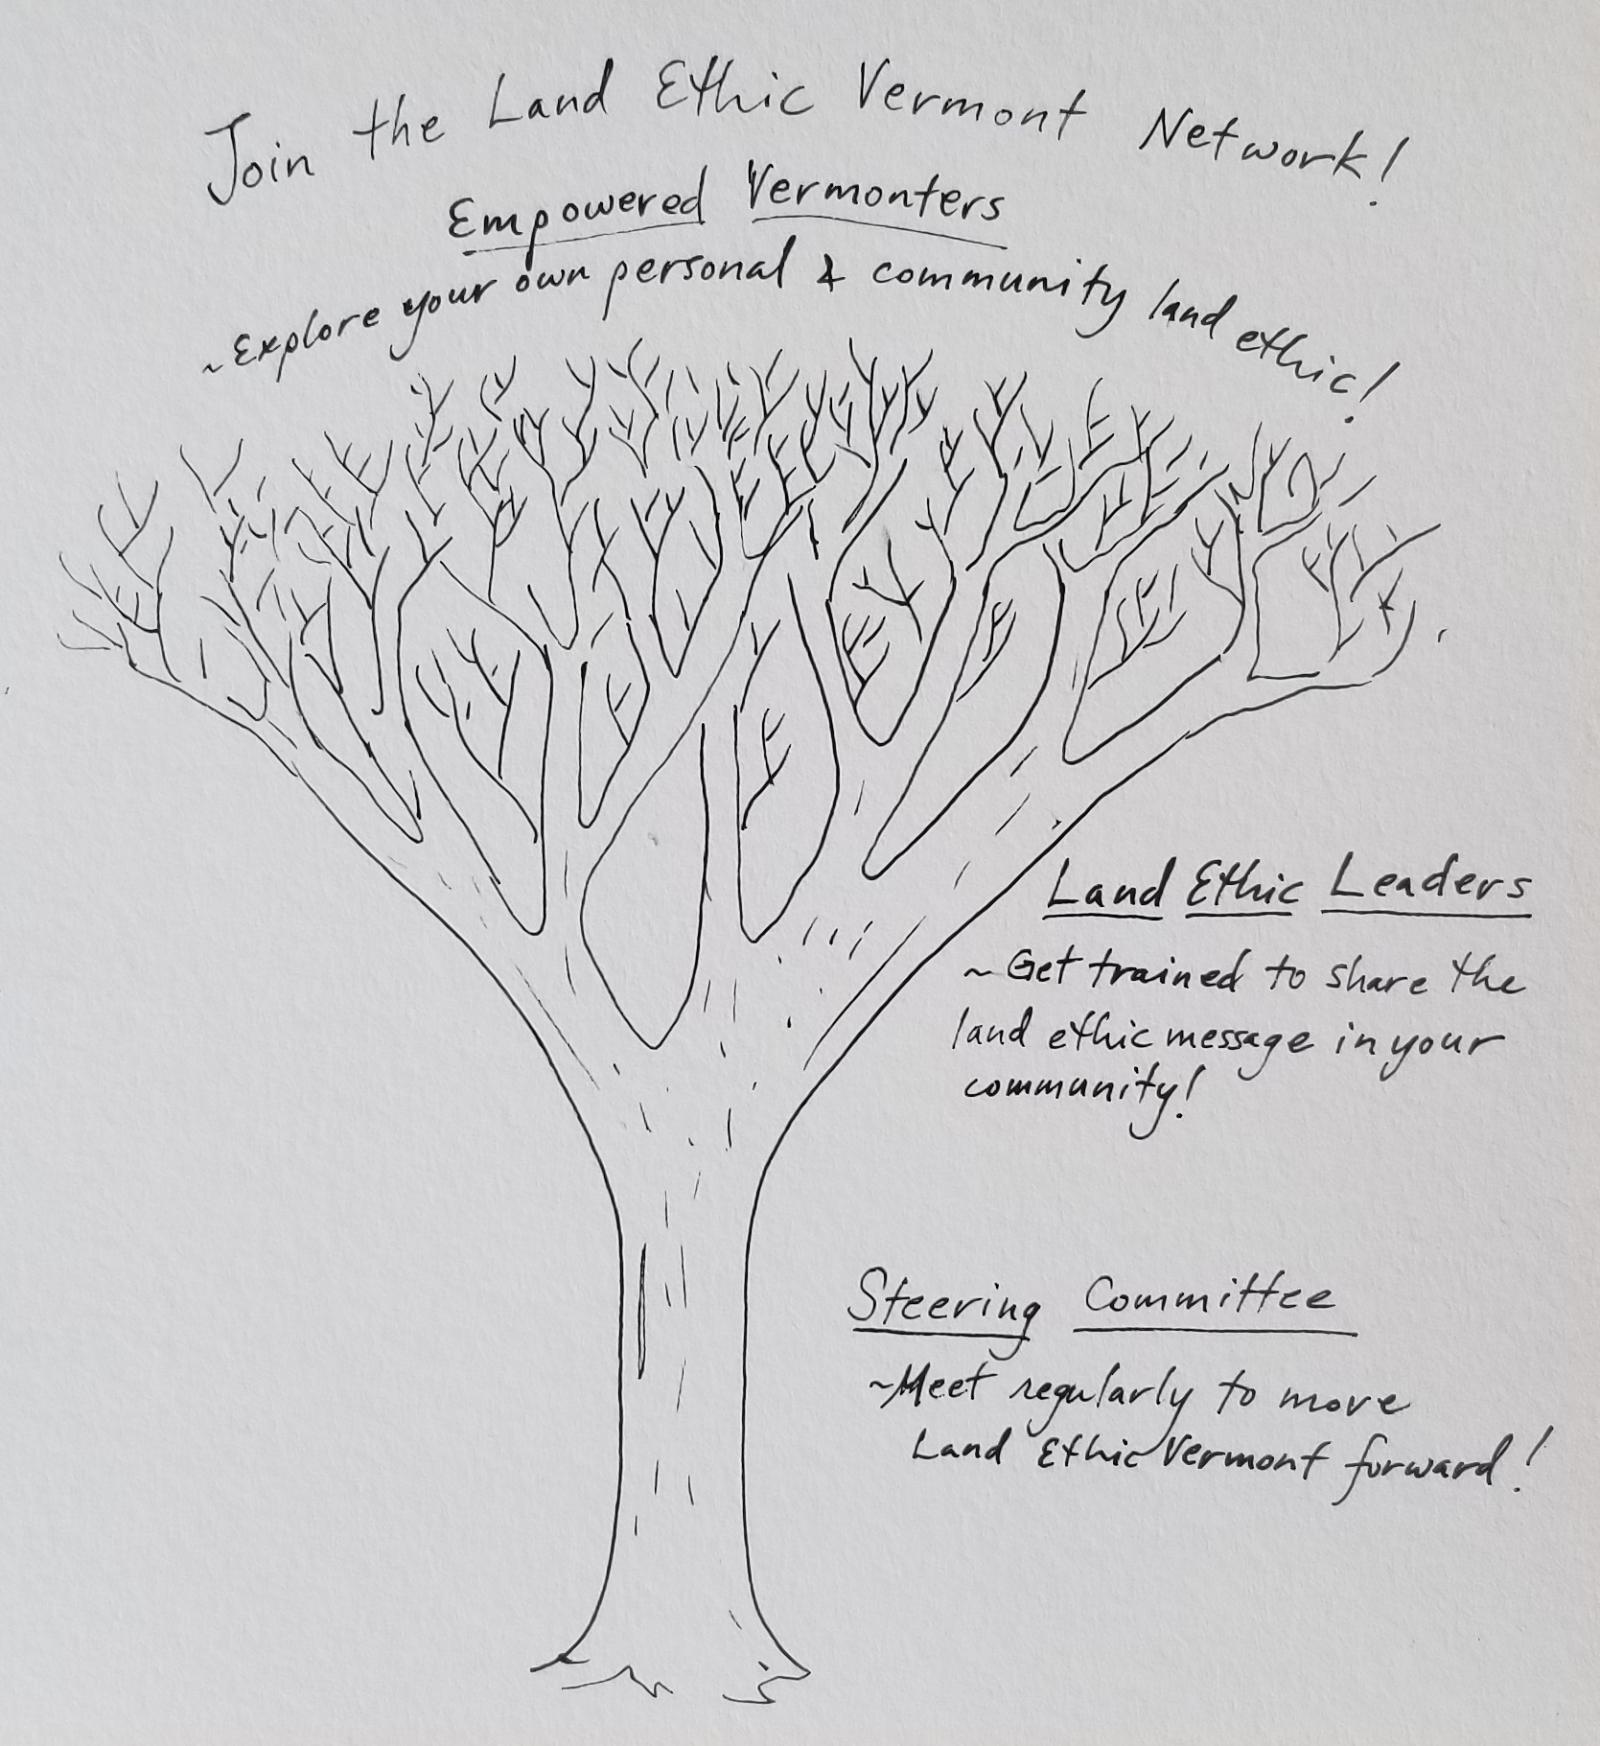 Tree drawing showing Steering Committee, Land Ethic Leaders, and network of empowered Vermonters